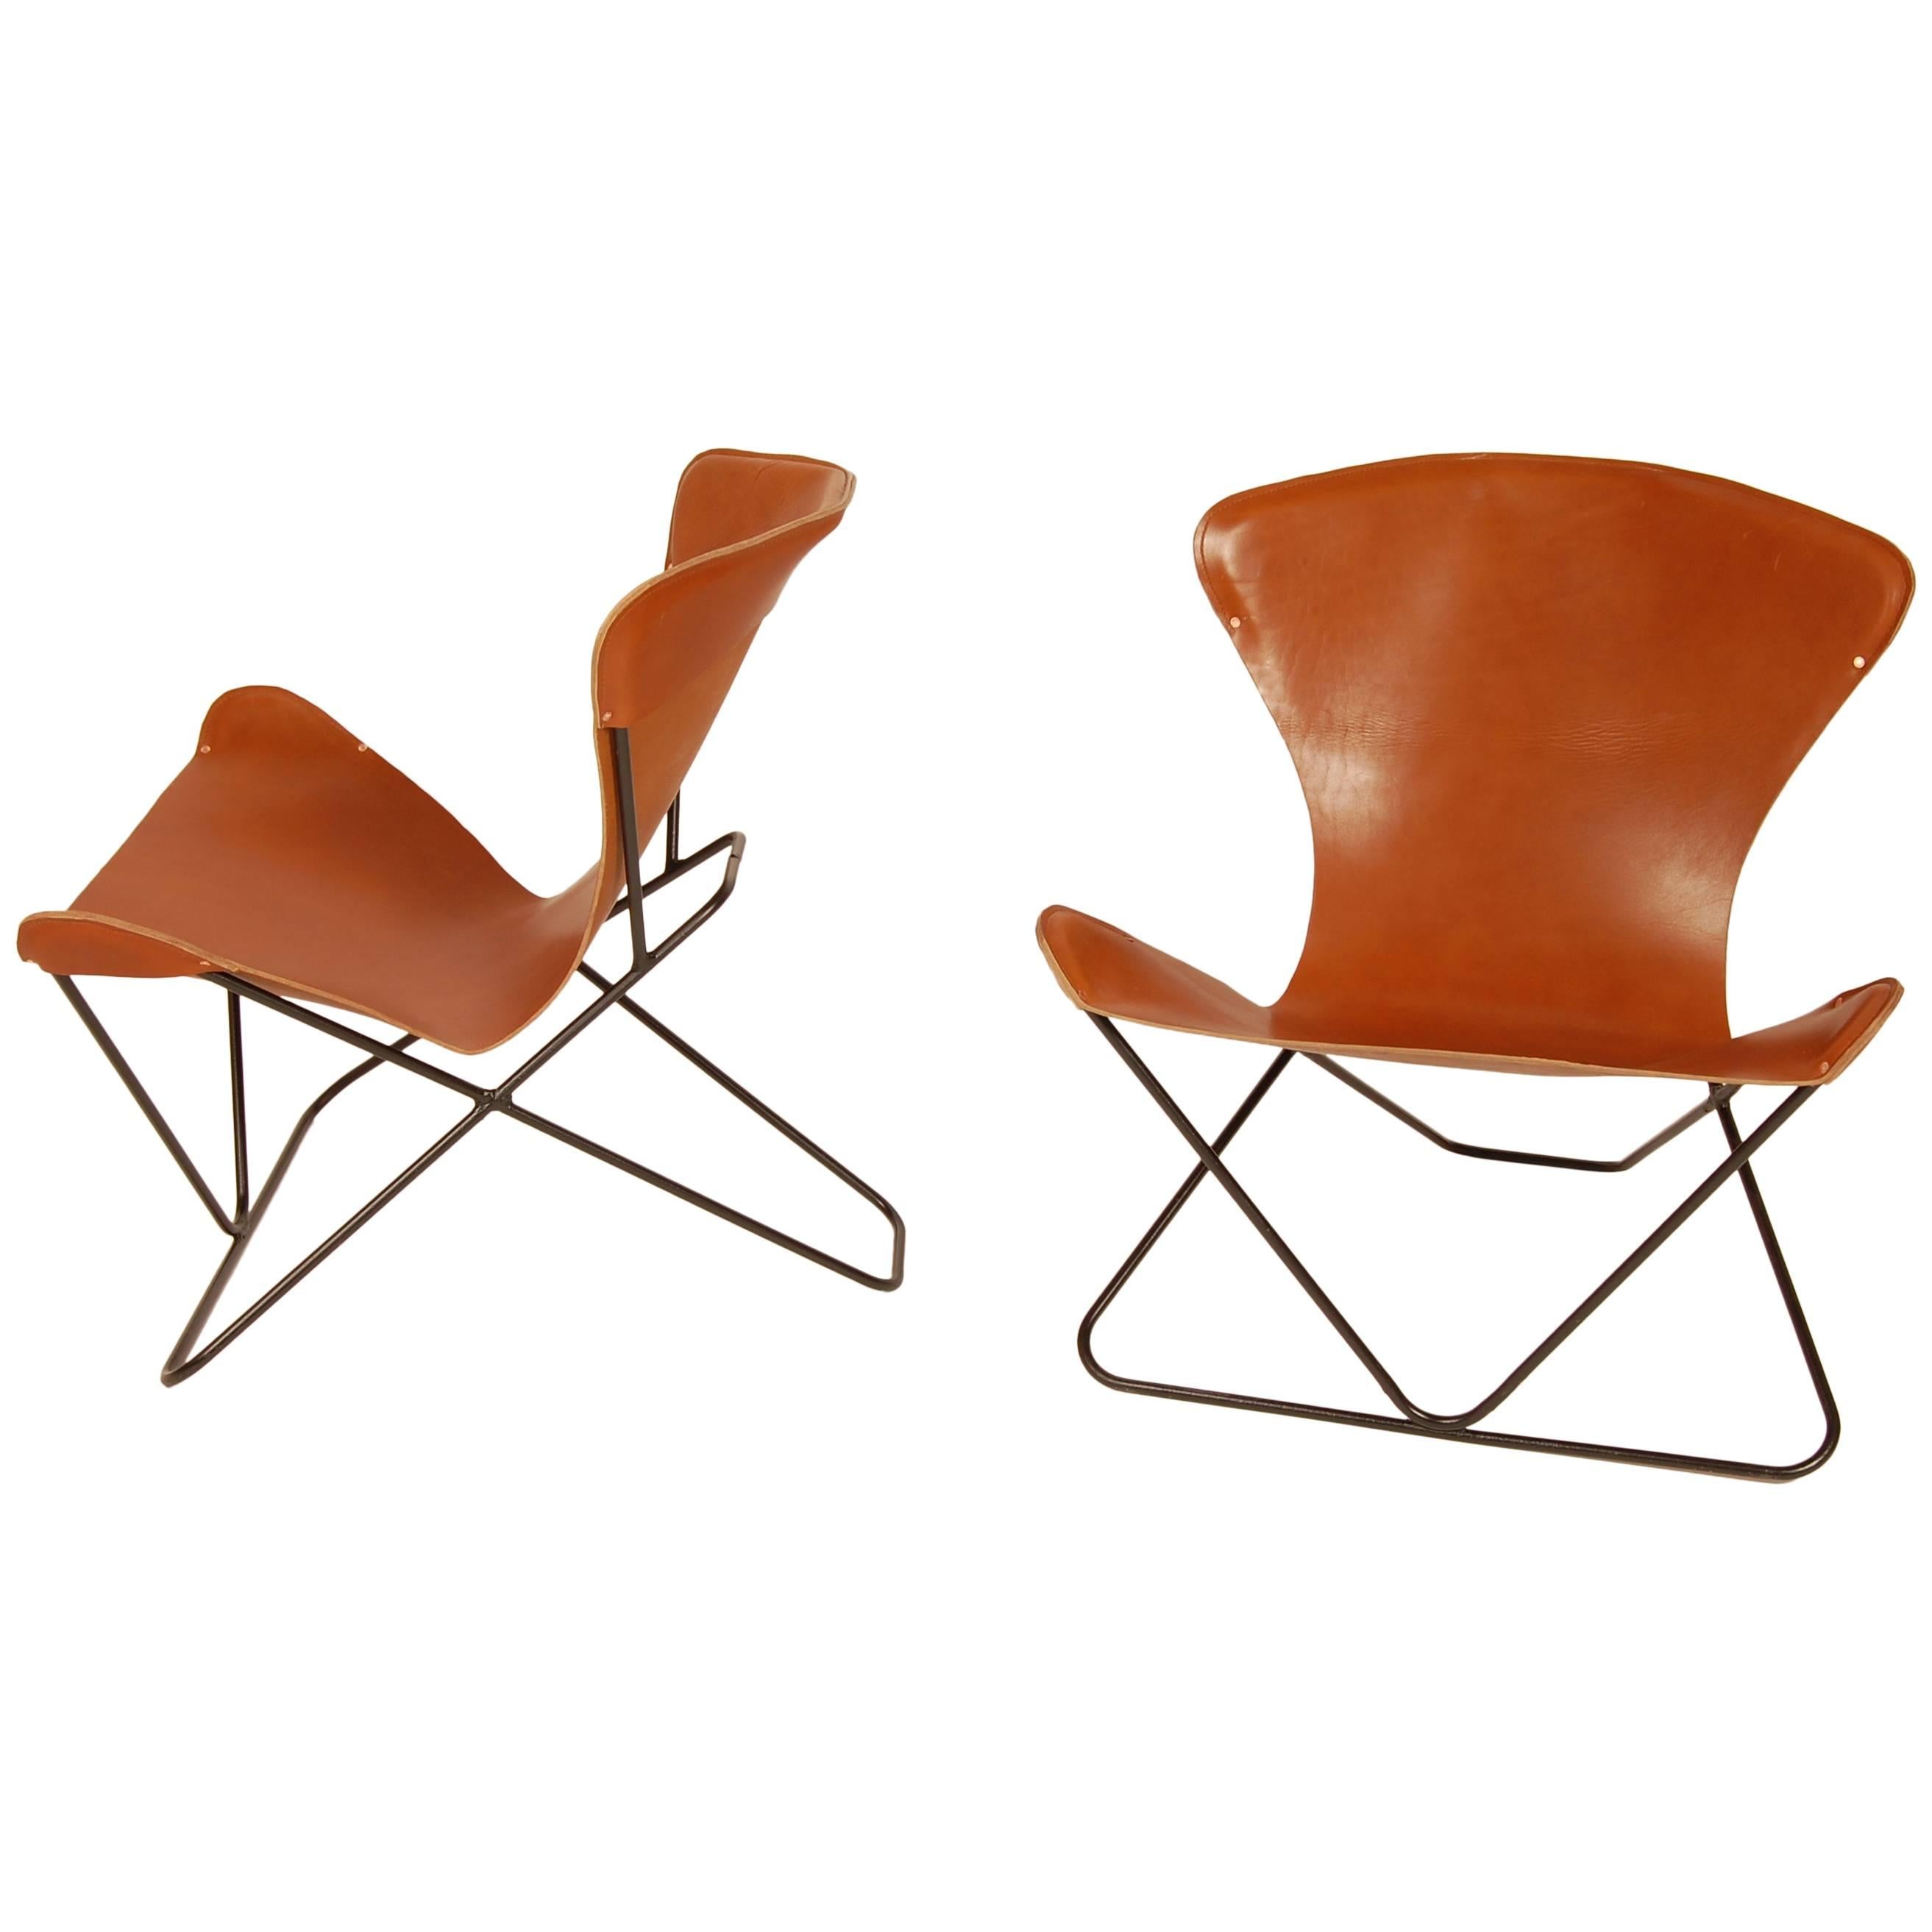  Iron and Leather Sling Chairs California Design "The Bolinas Lounge" For Sale